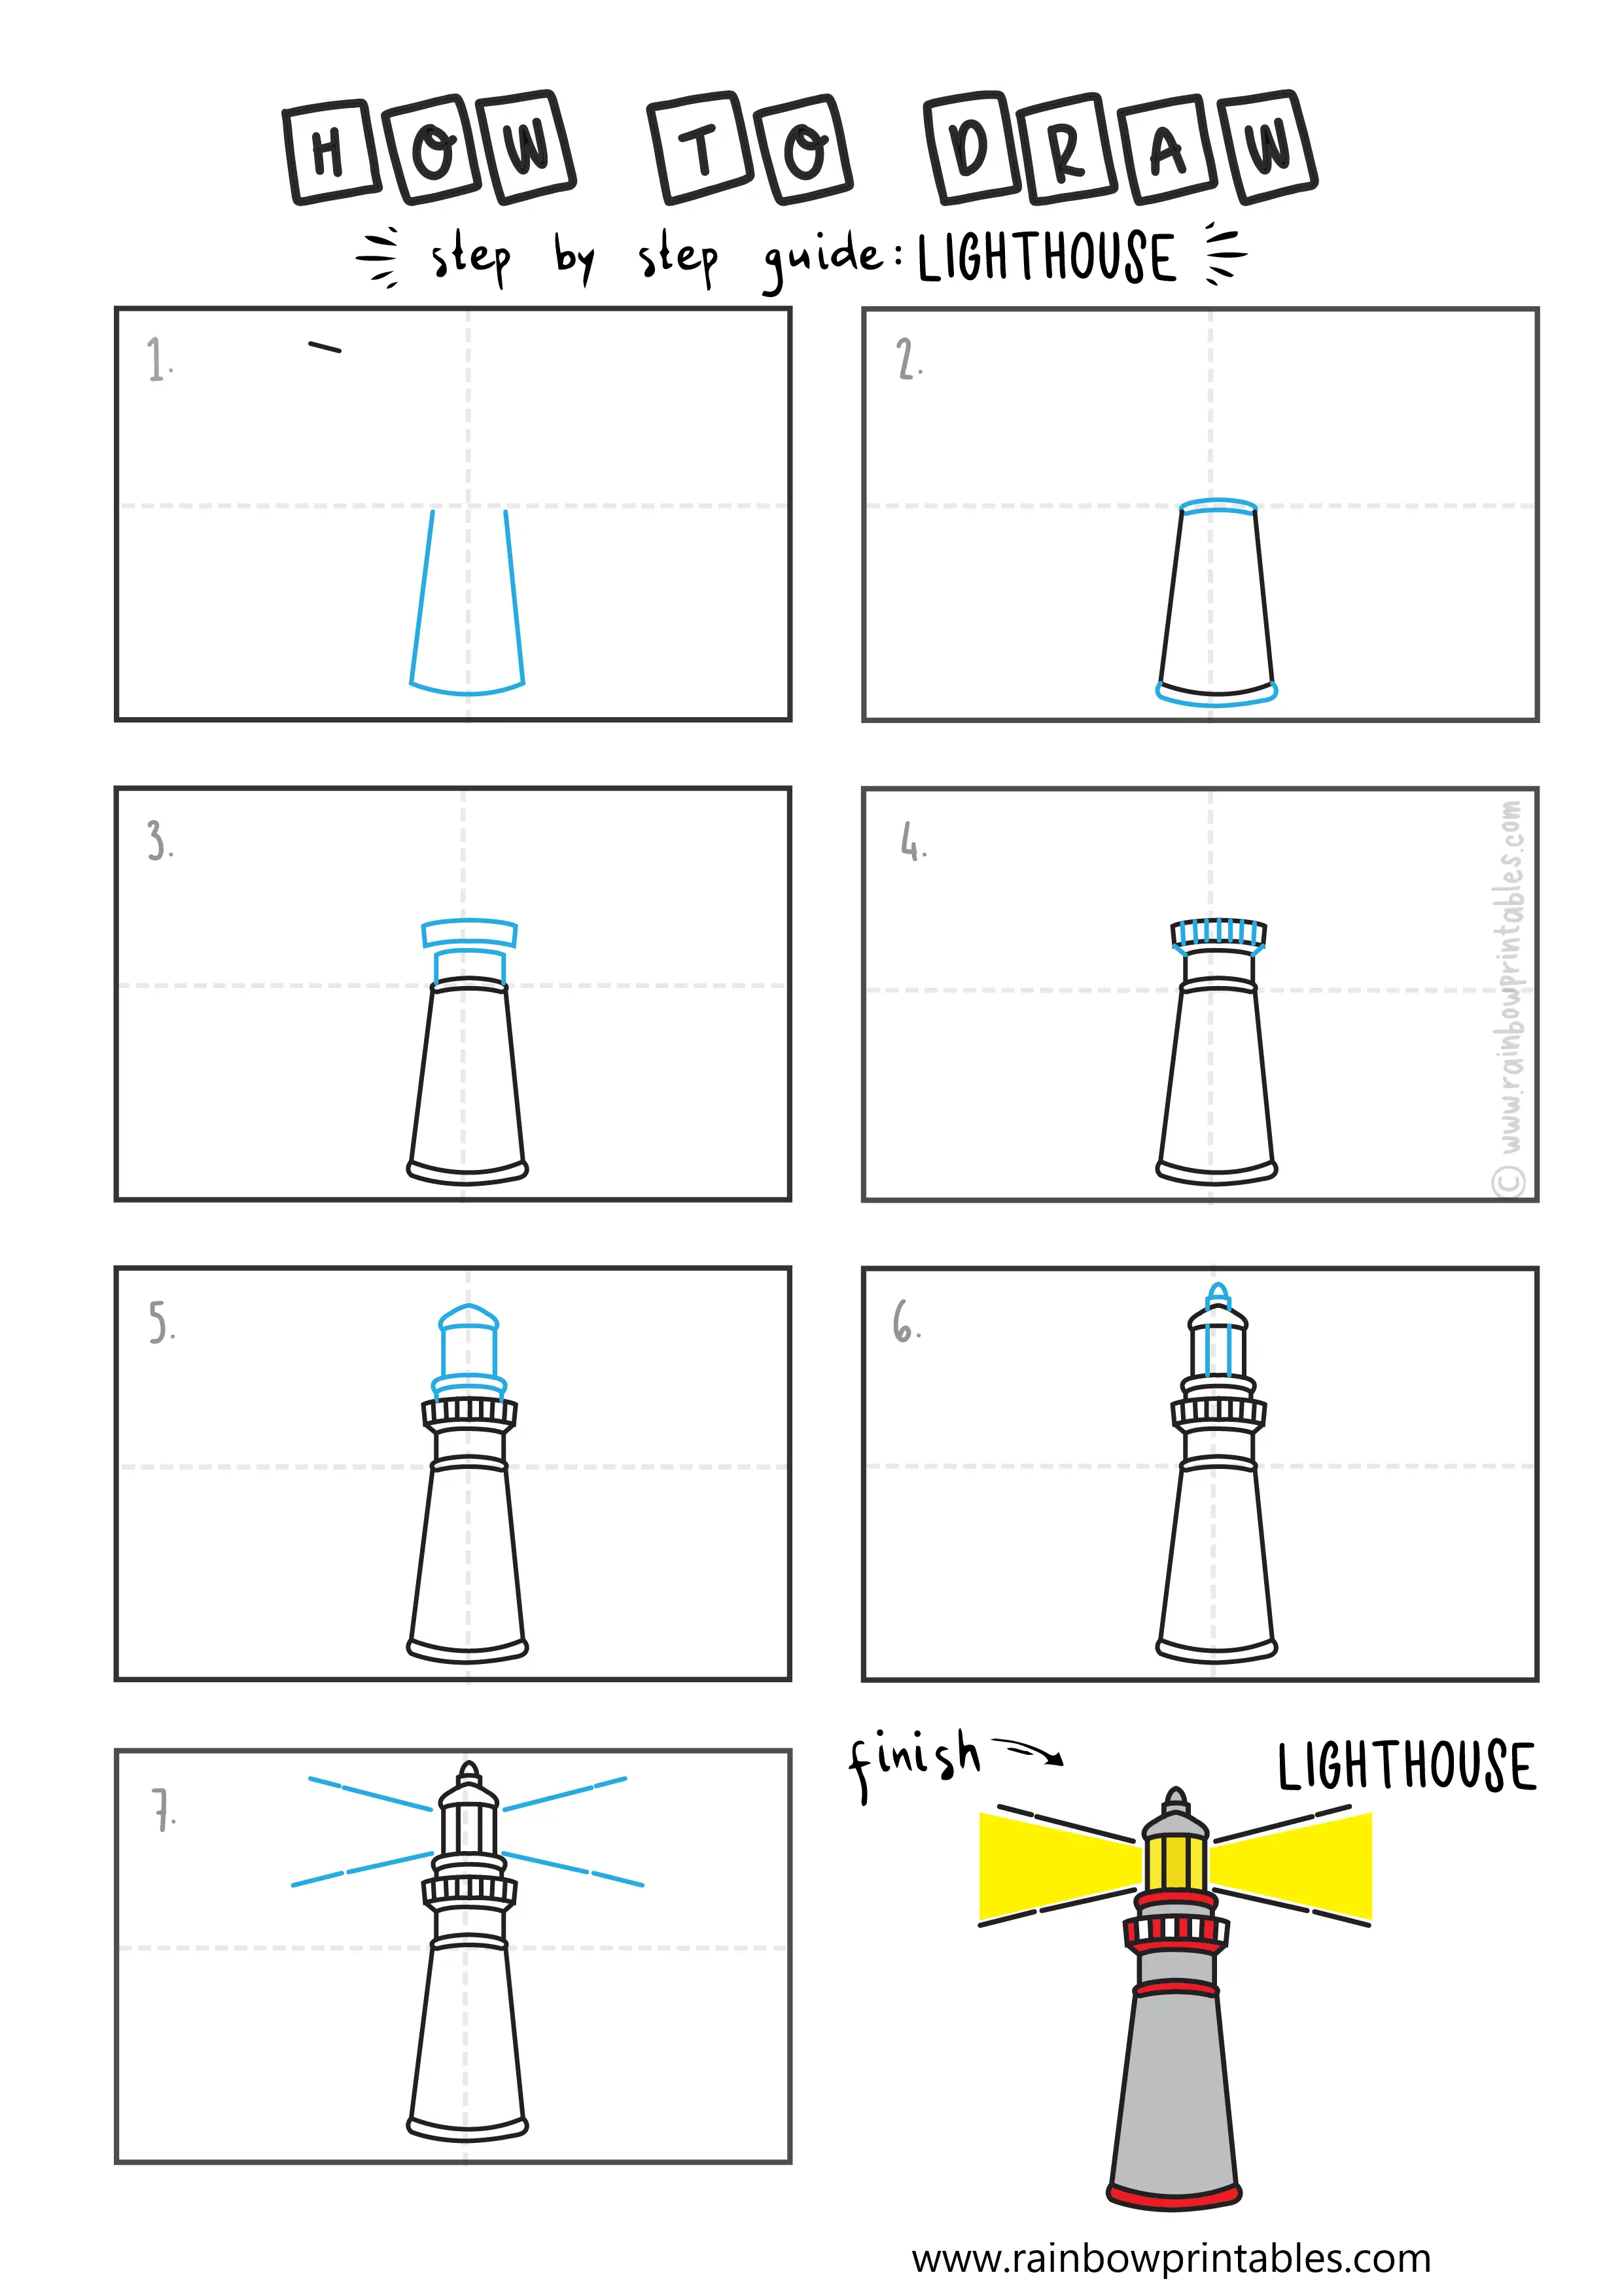 HOW TO DRAW A LIGHTHOUSE BEACH BUILDING ILLUSTRATION STEP BY STEP EASY SIMPLE FOR KIDS